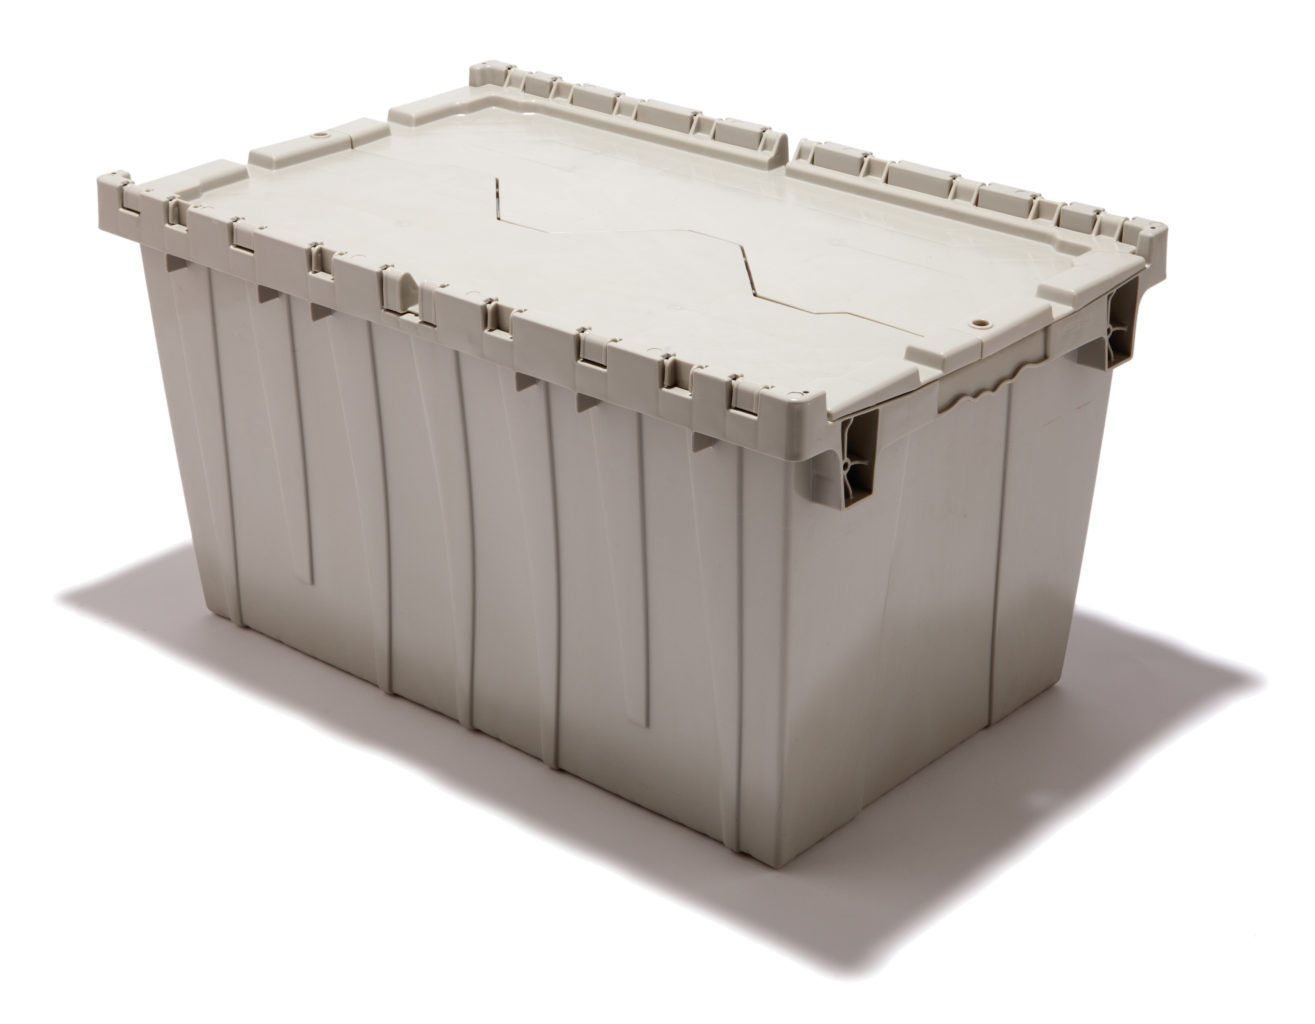 22 x 13 x 12 – Handheld Attached Lid Container